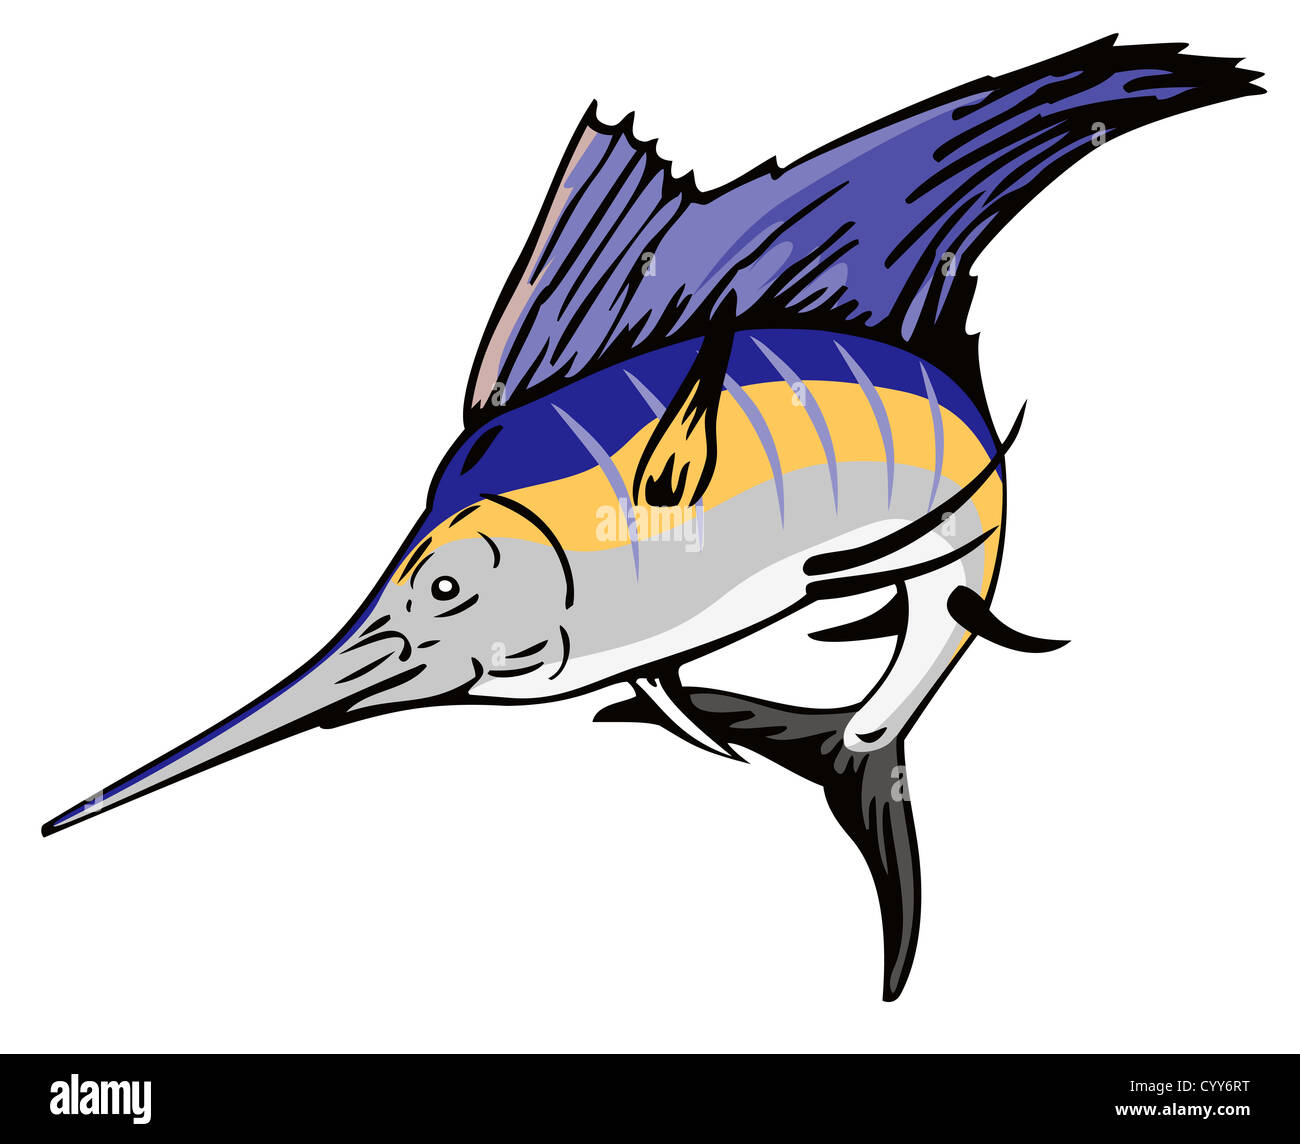 Illustration of a sailfish fish jumping with fishing boat in background done in retro style. Stock Photo